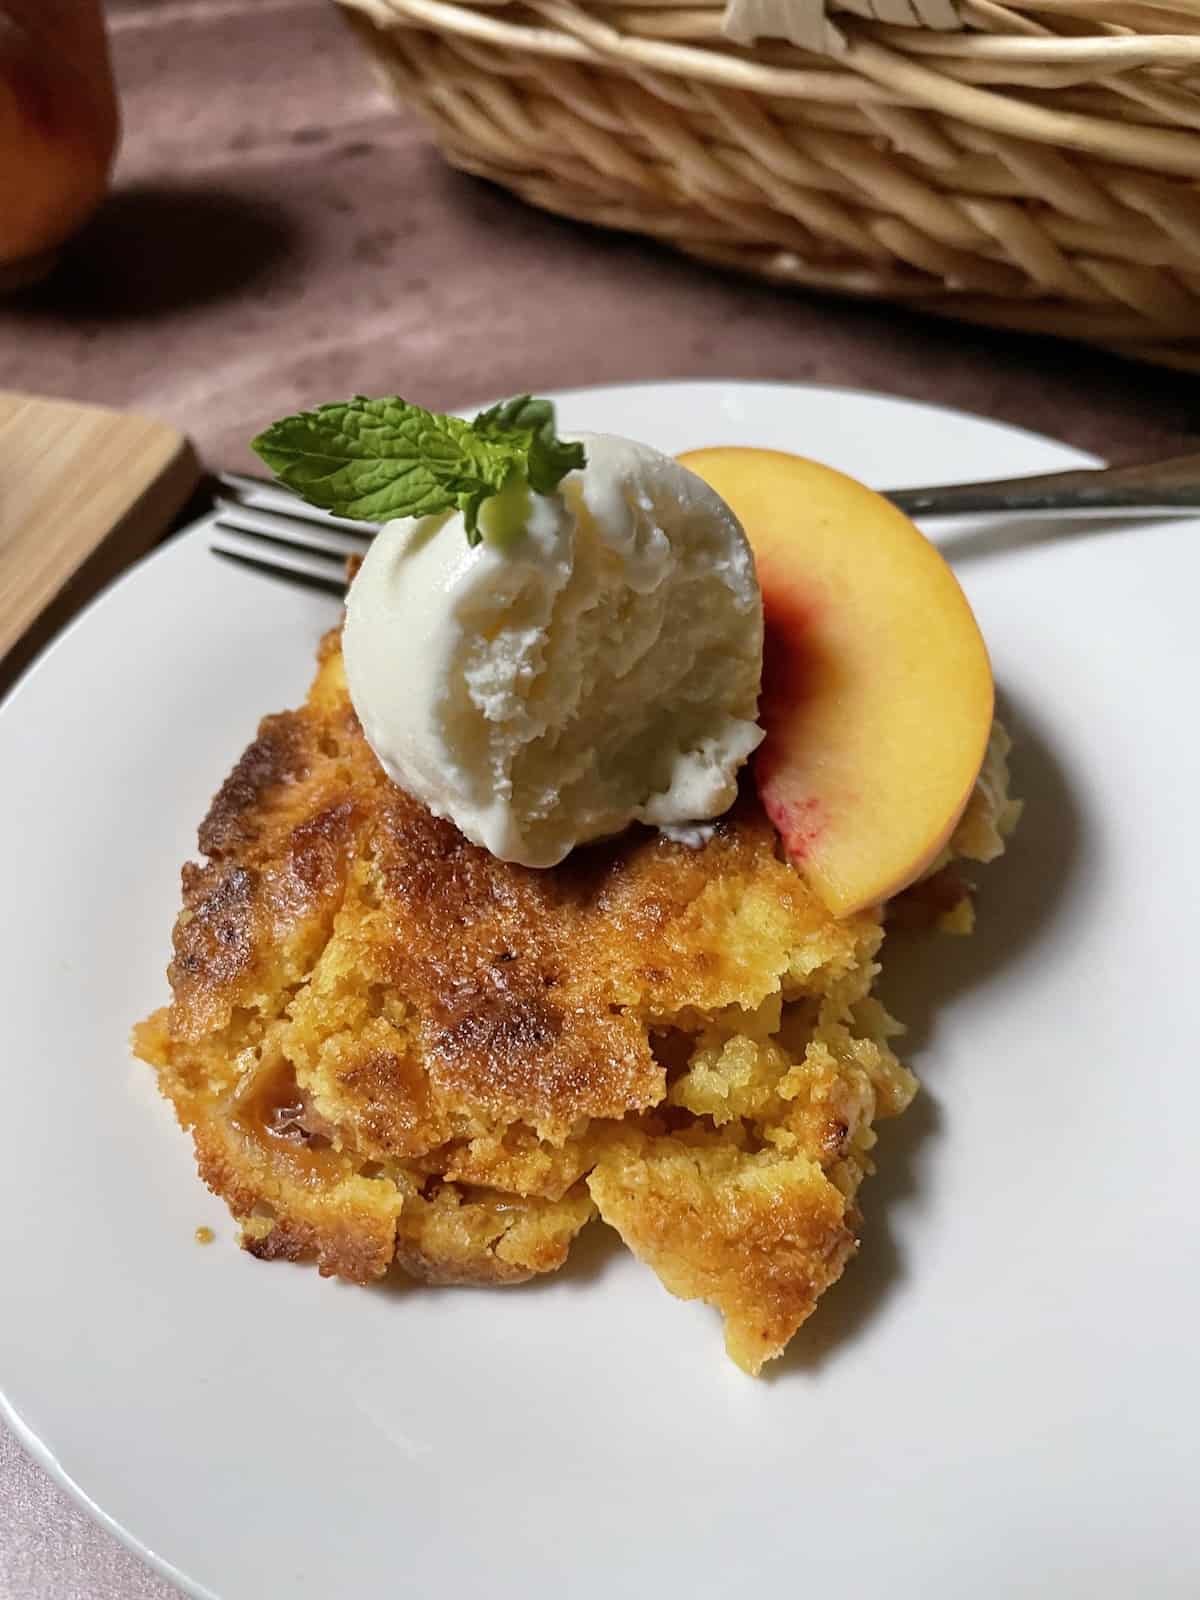 Peach cobbler with ice cream and a mint sprig.